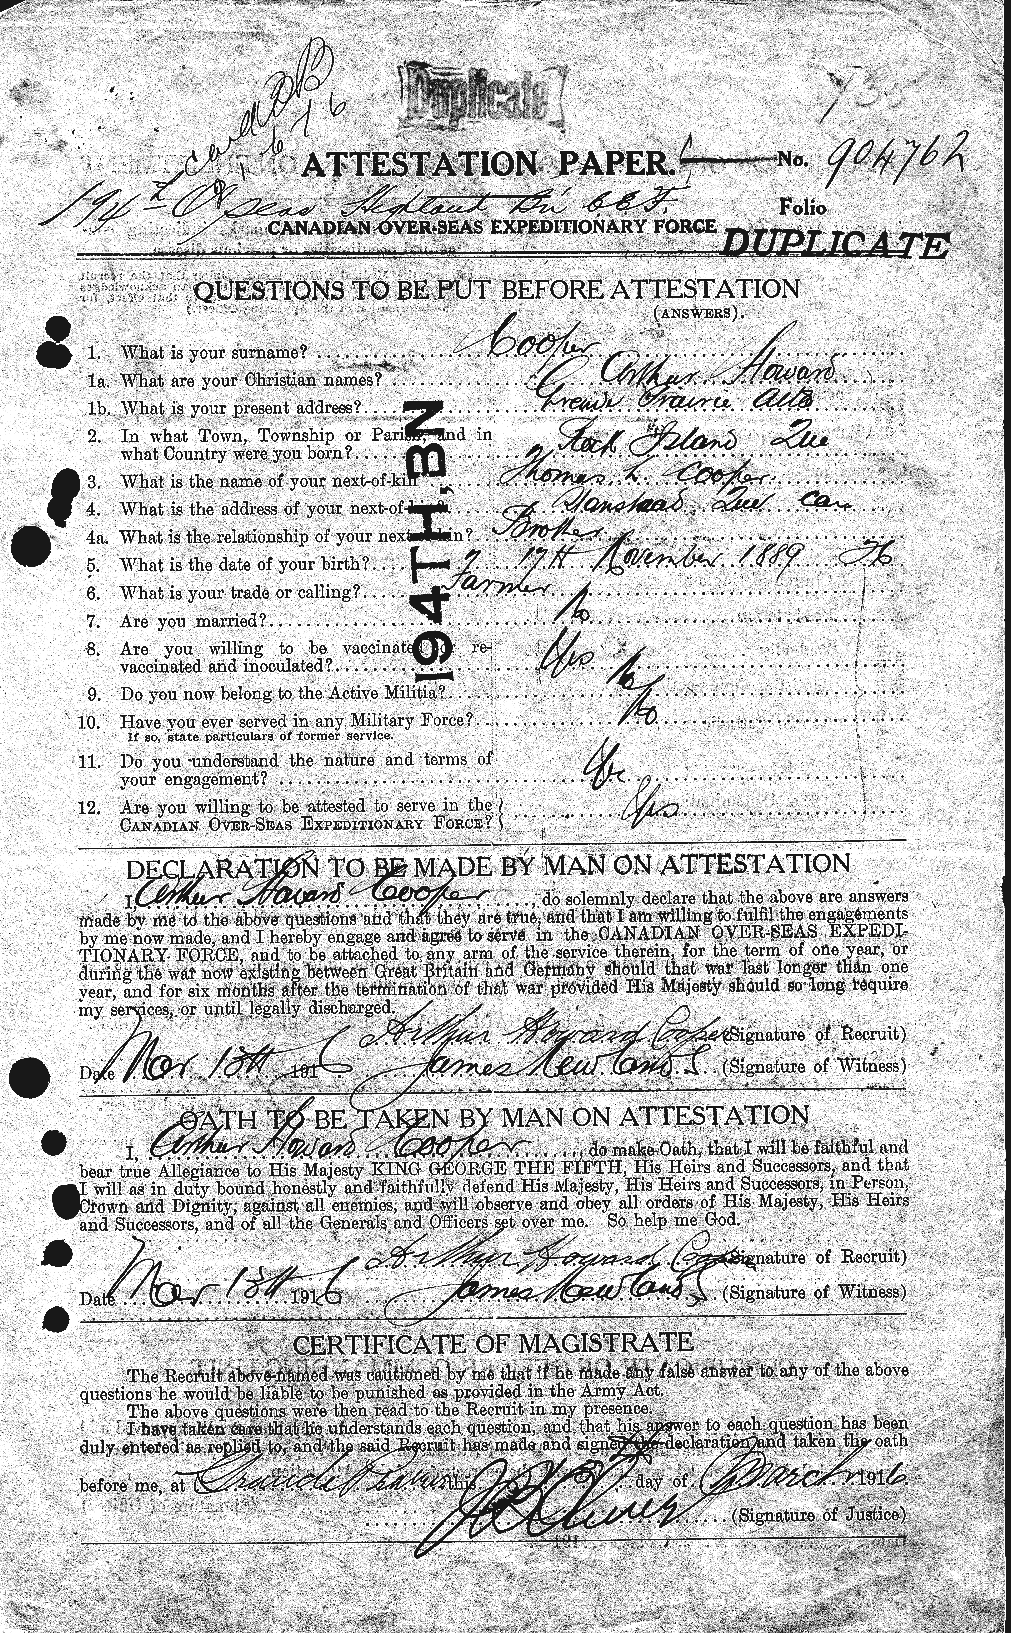 Personnel Records of the First World War - CEF 054364a